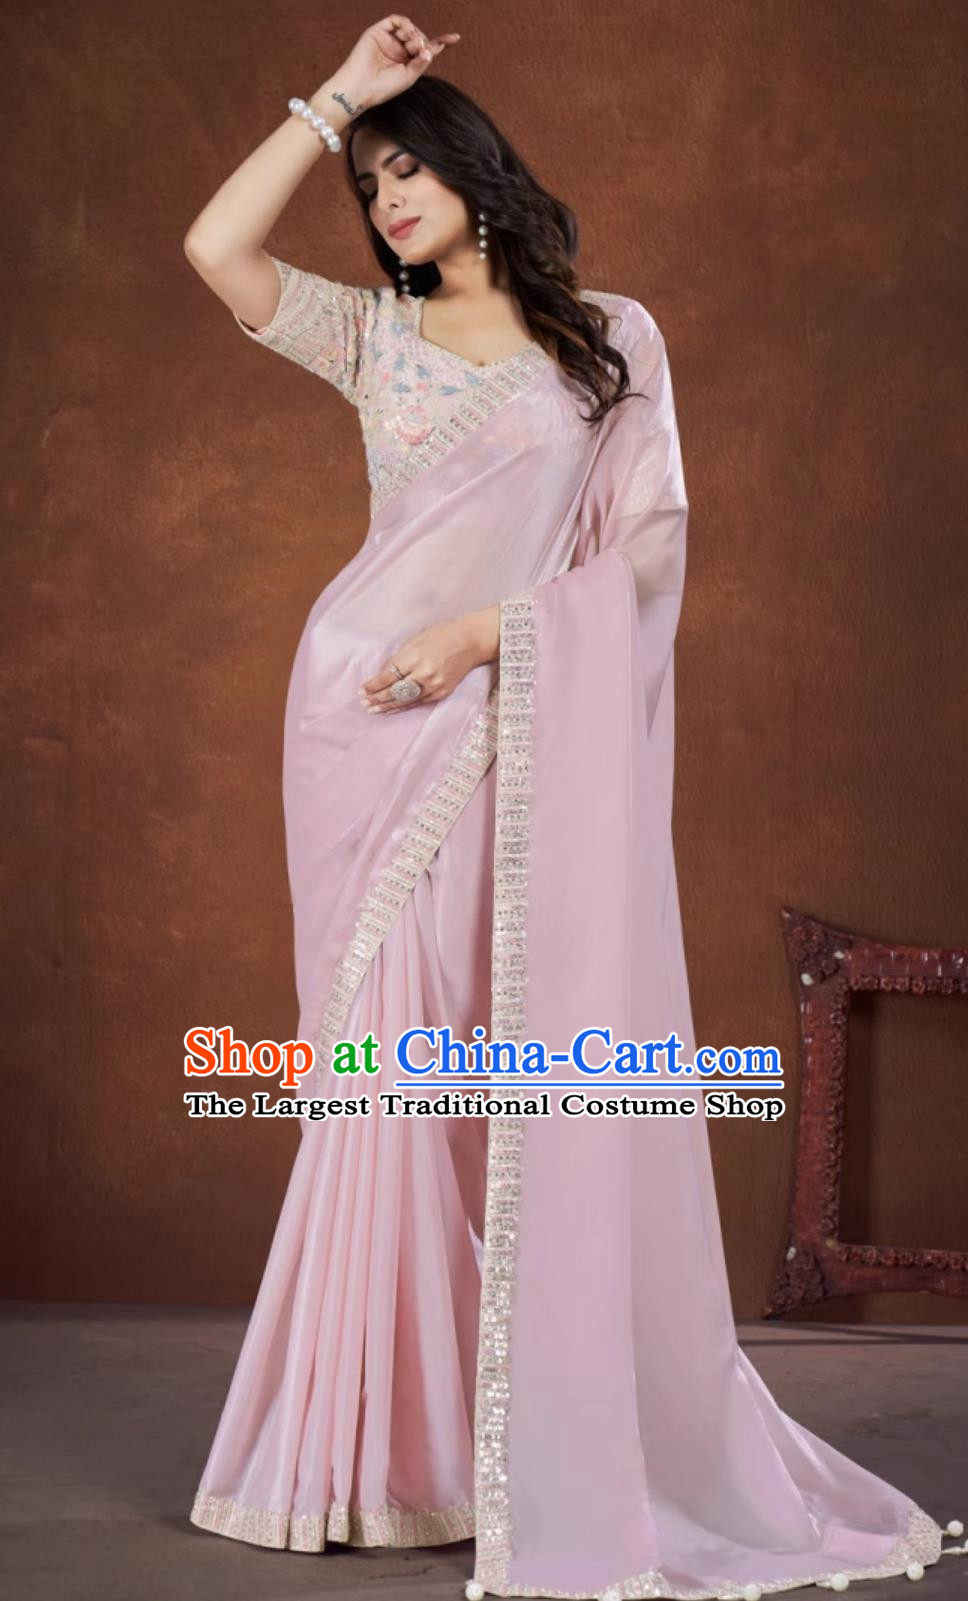 India National Costume Indian Traditional Women Clothing Embroidery Light Pink Dress Festival Sari